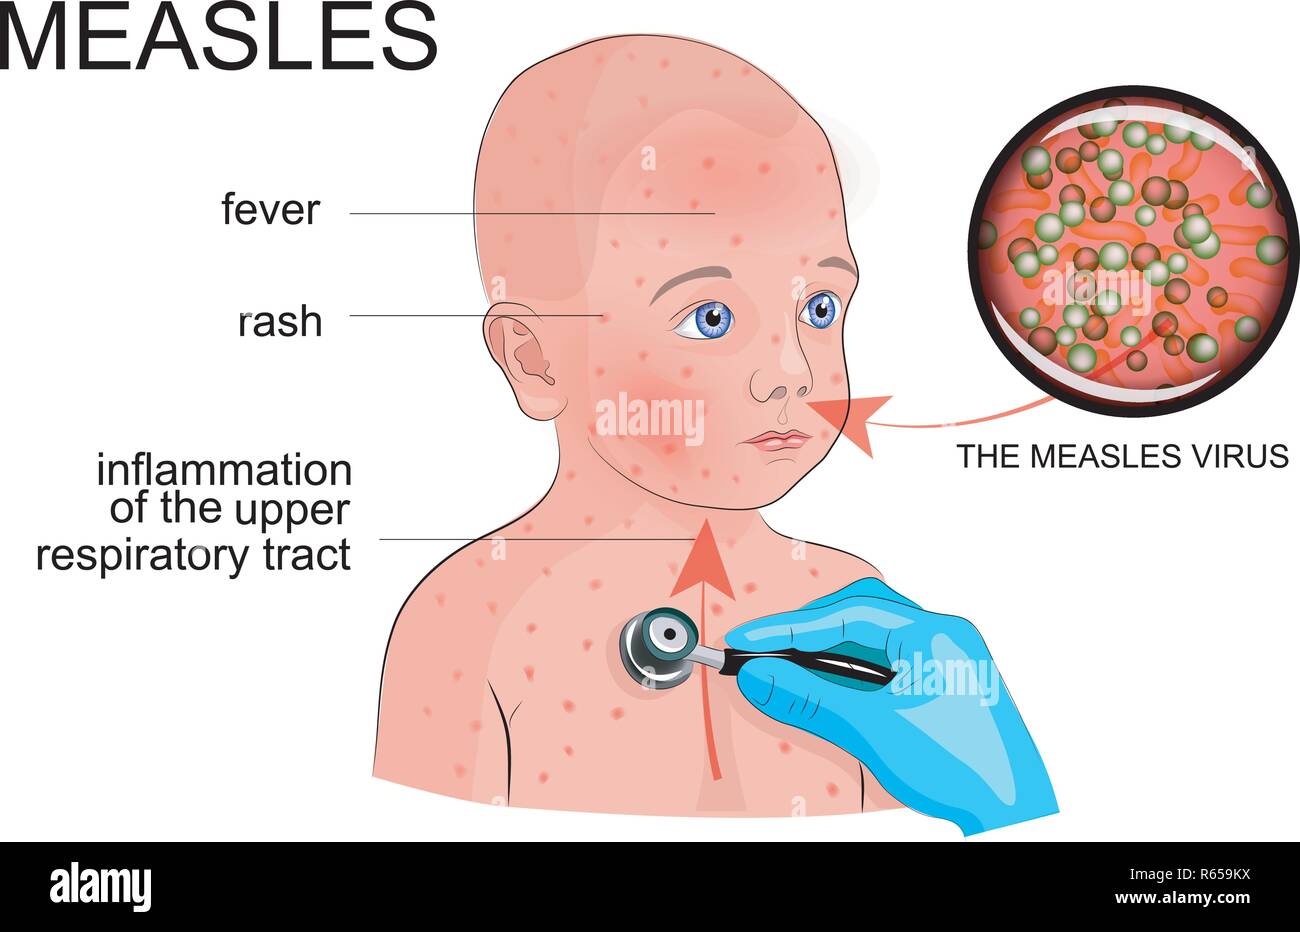 illustration of a boy with symptoms of rubella or measles Stock Vector